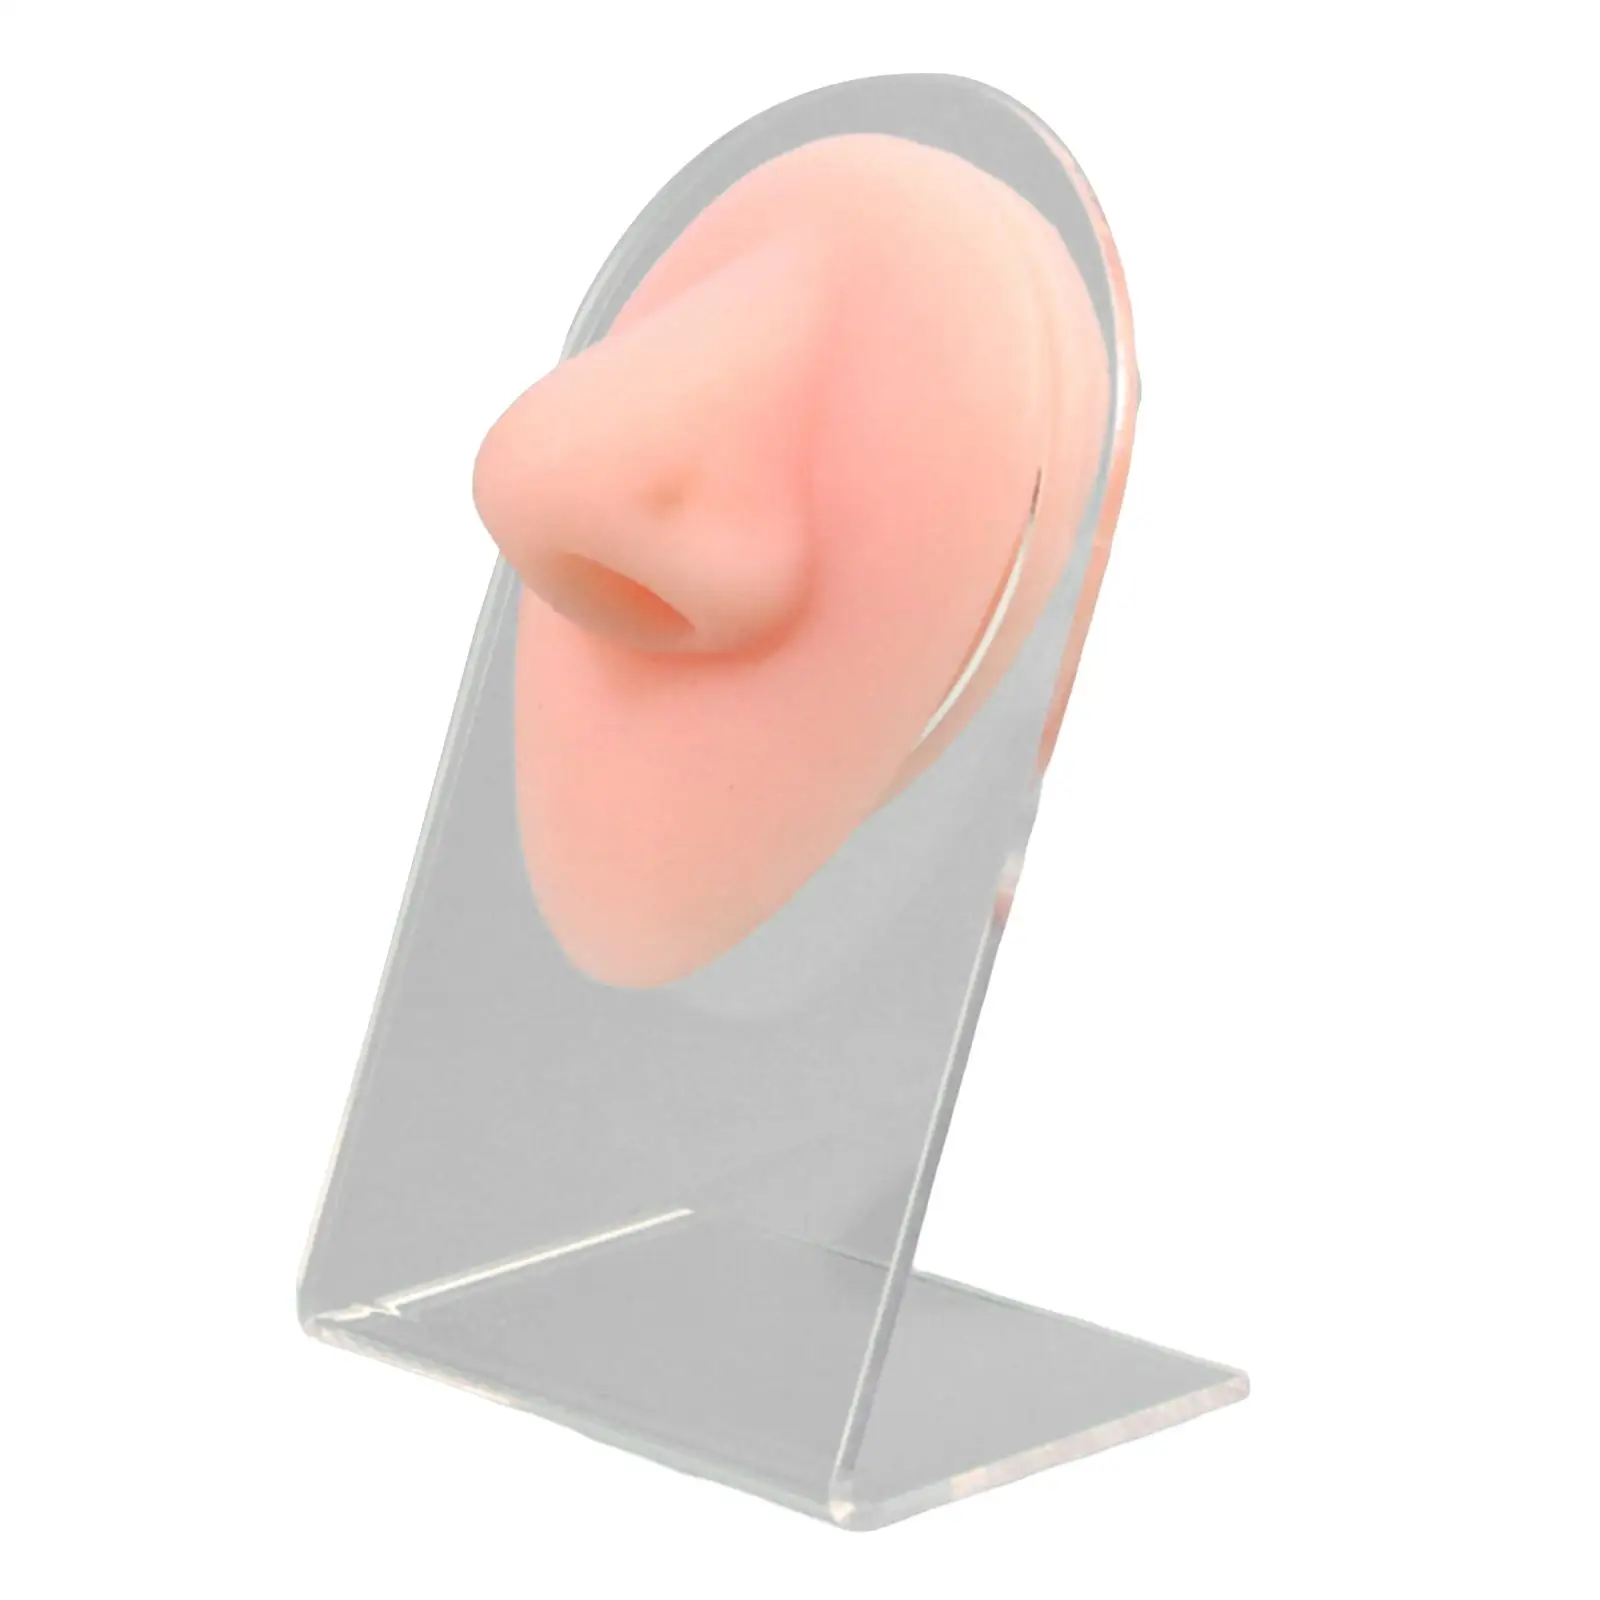 Nose Model Display Silicone with Rack Multipurpose Professional for Jewelry